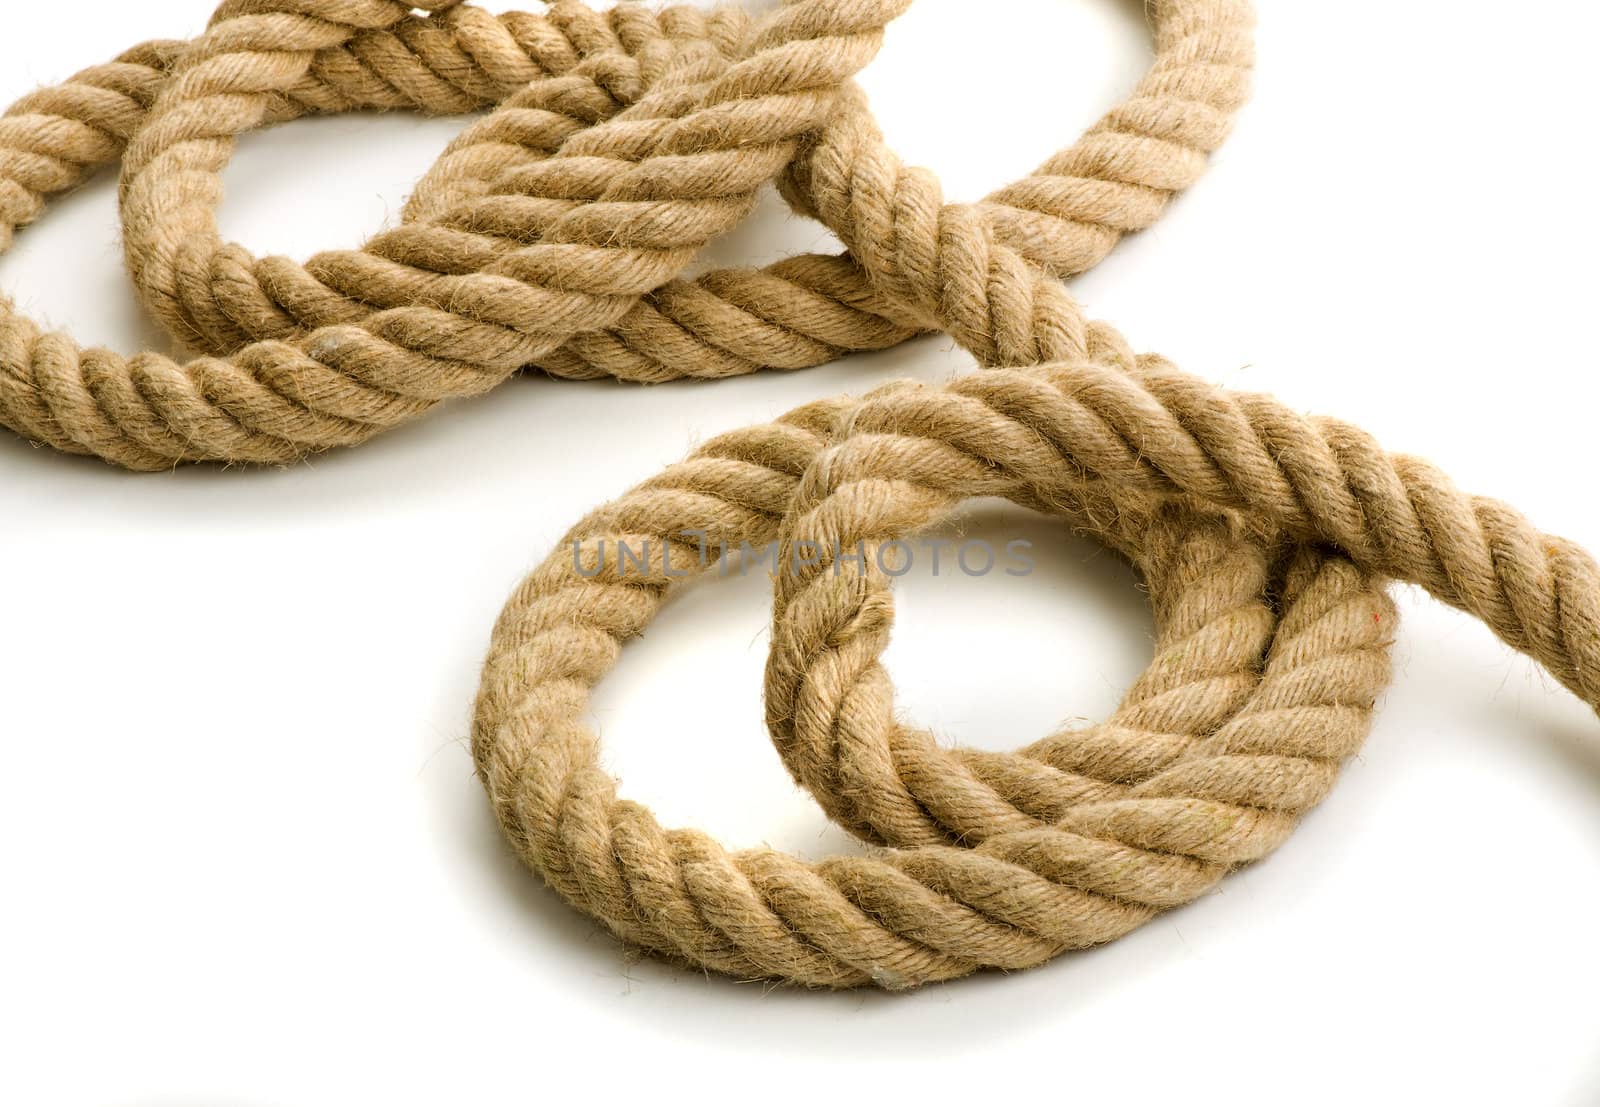 Chaotic coils of a thick rope on a white background